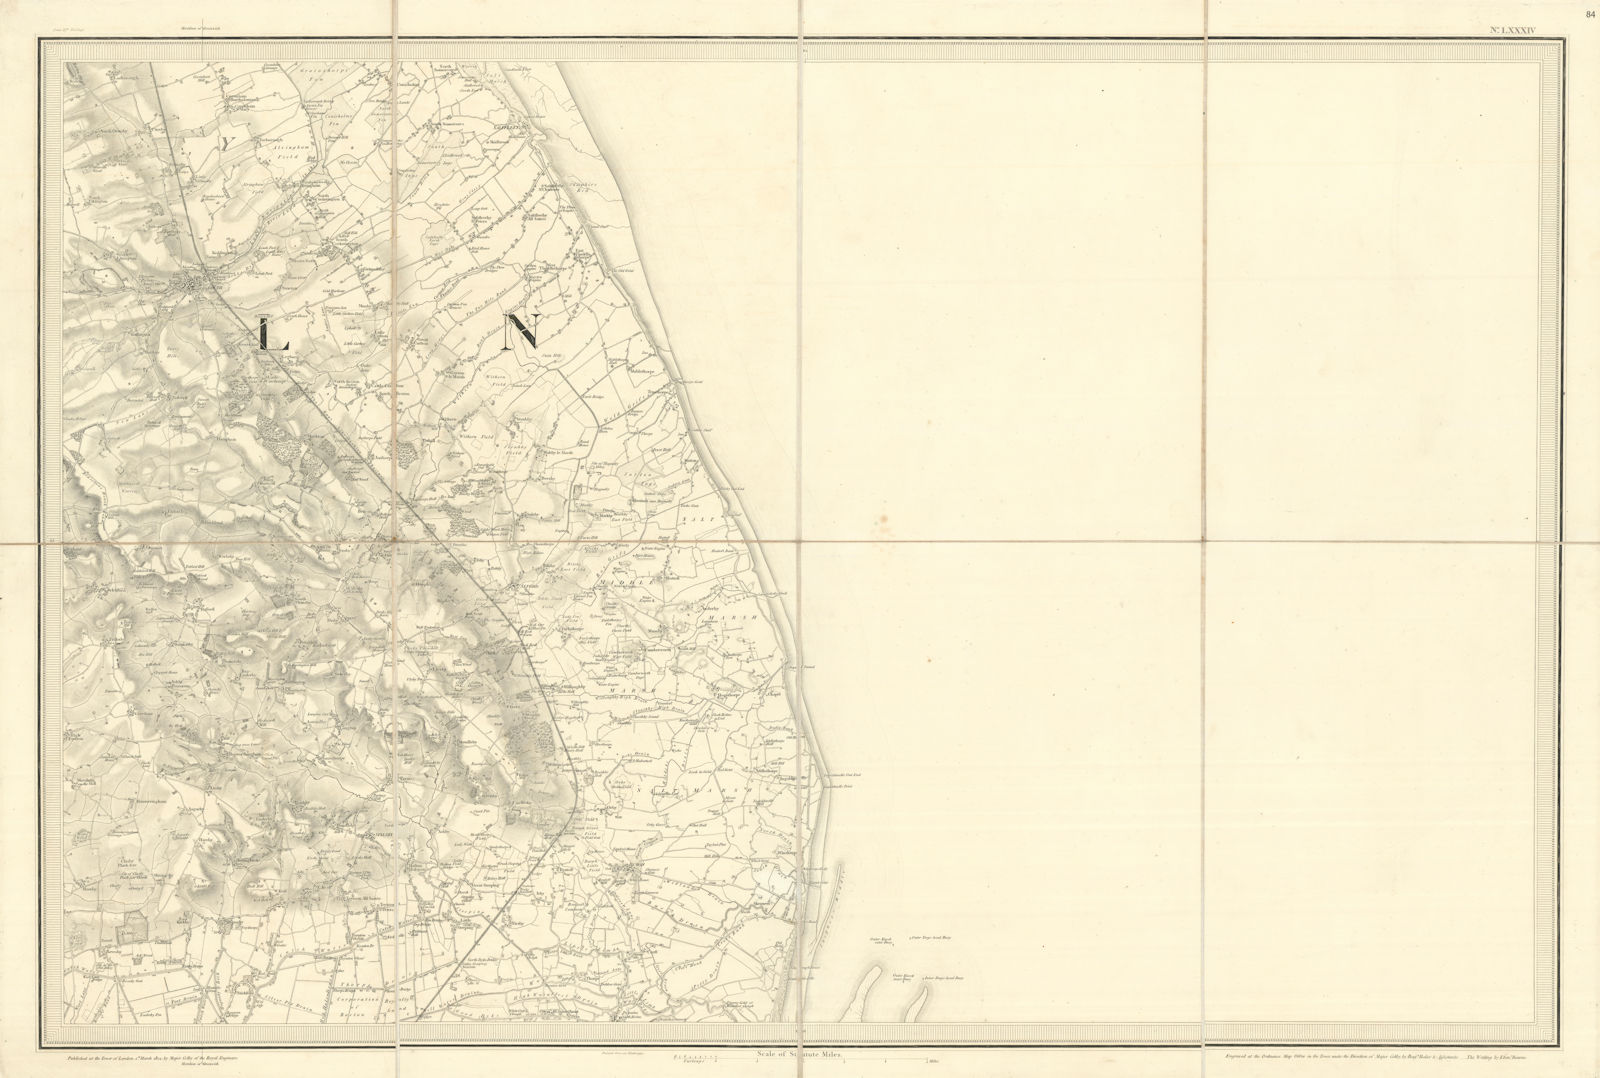 OS #84 Lincolnshire Wolds, Coast & Marshes. Louth Burgh Saltfleet  1824 map